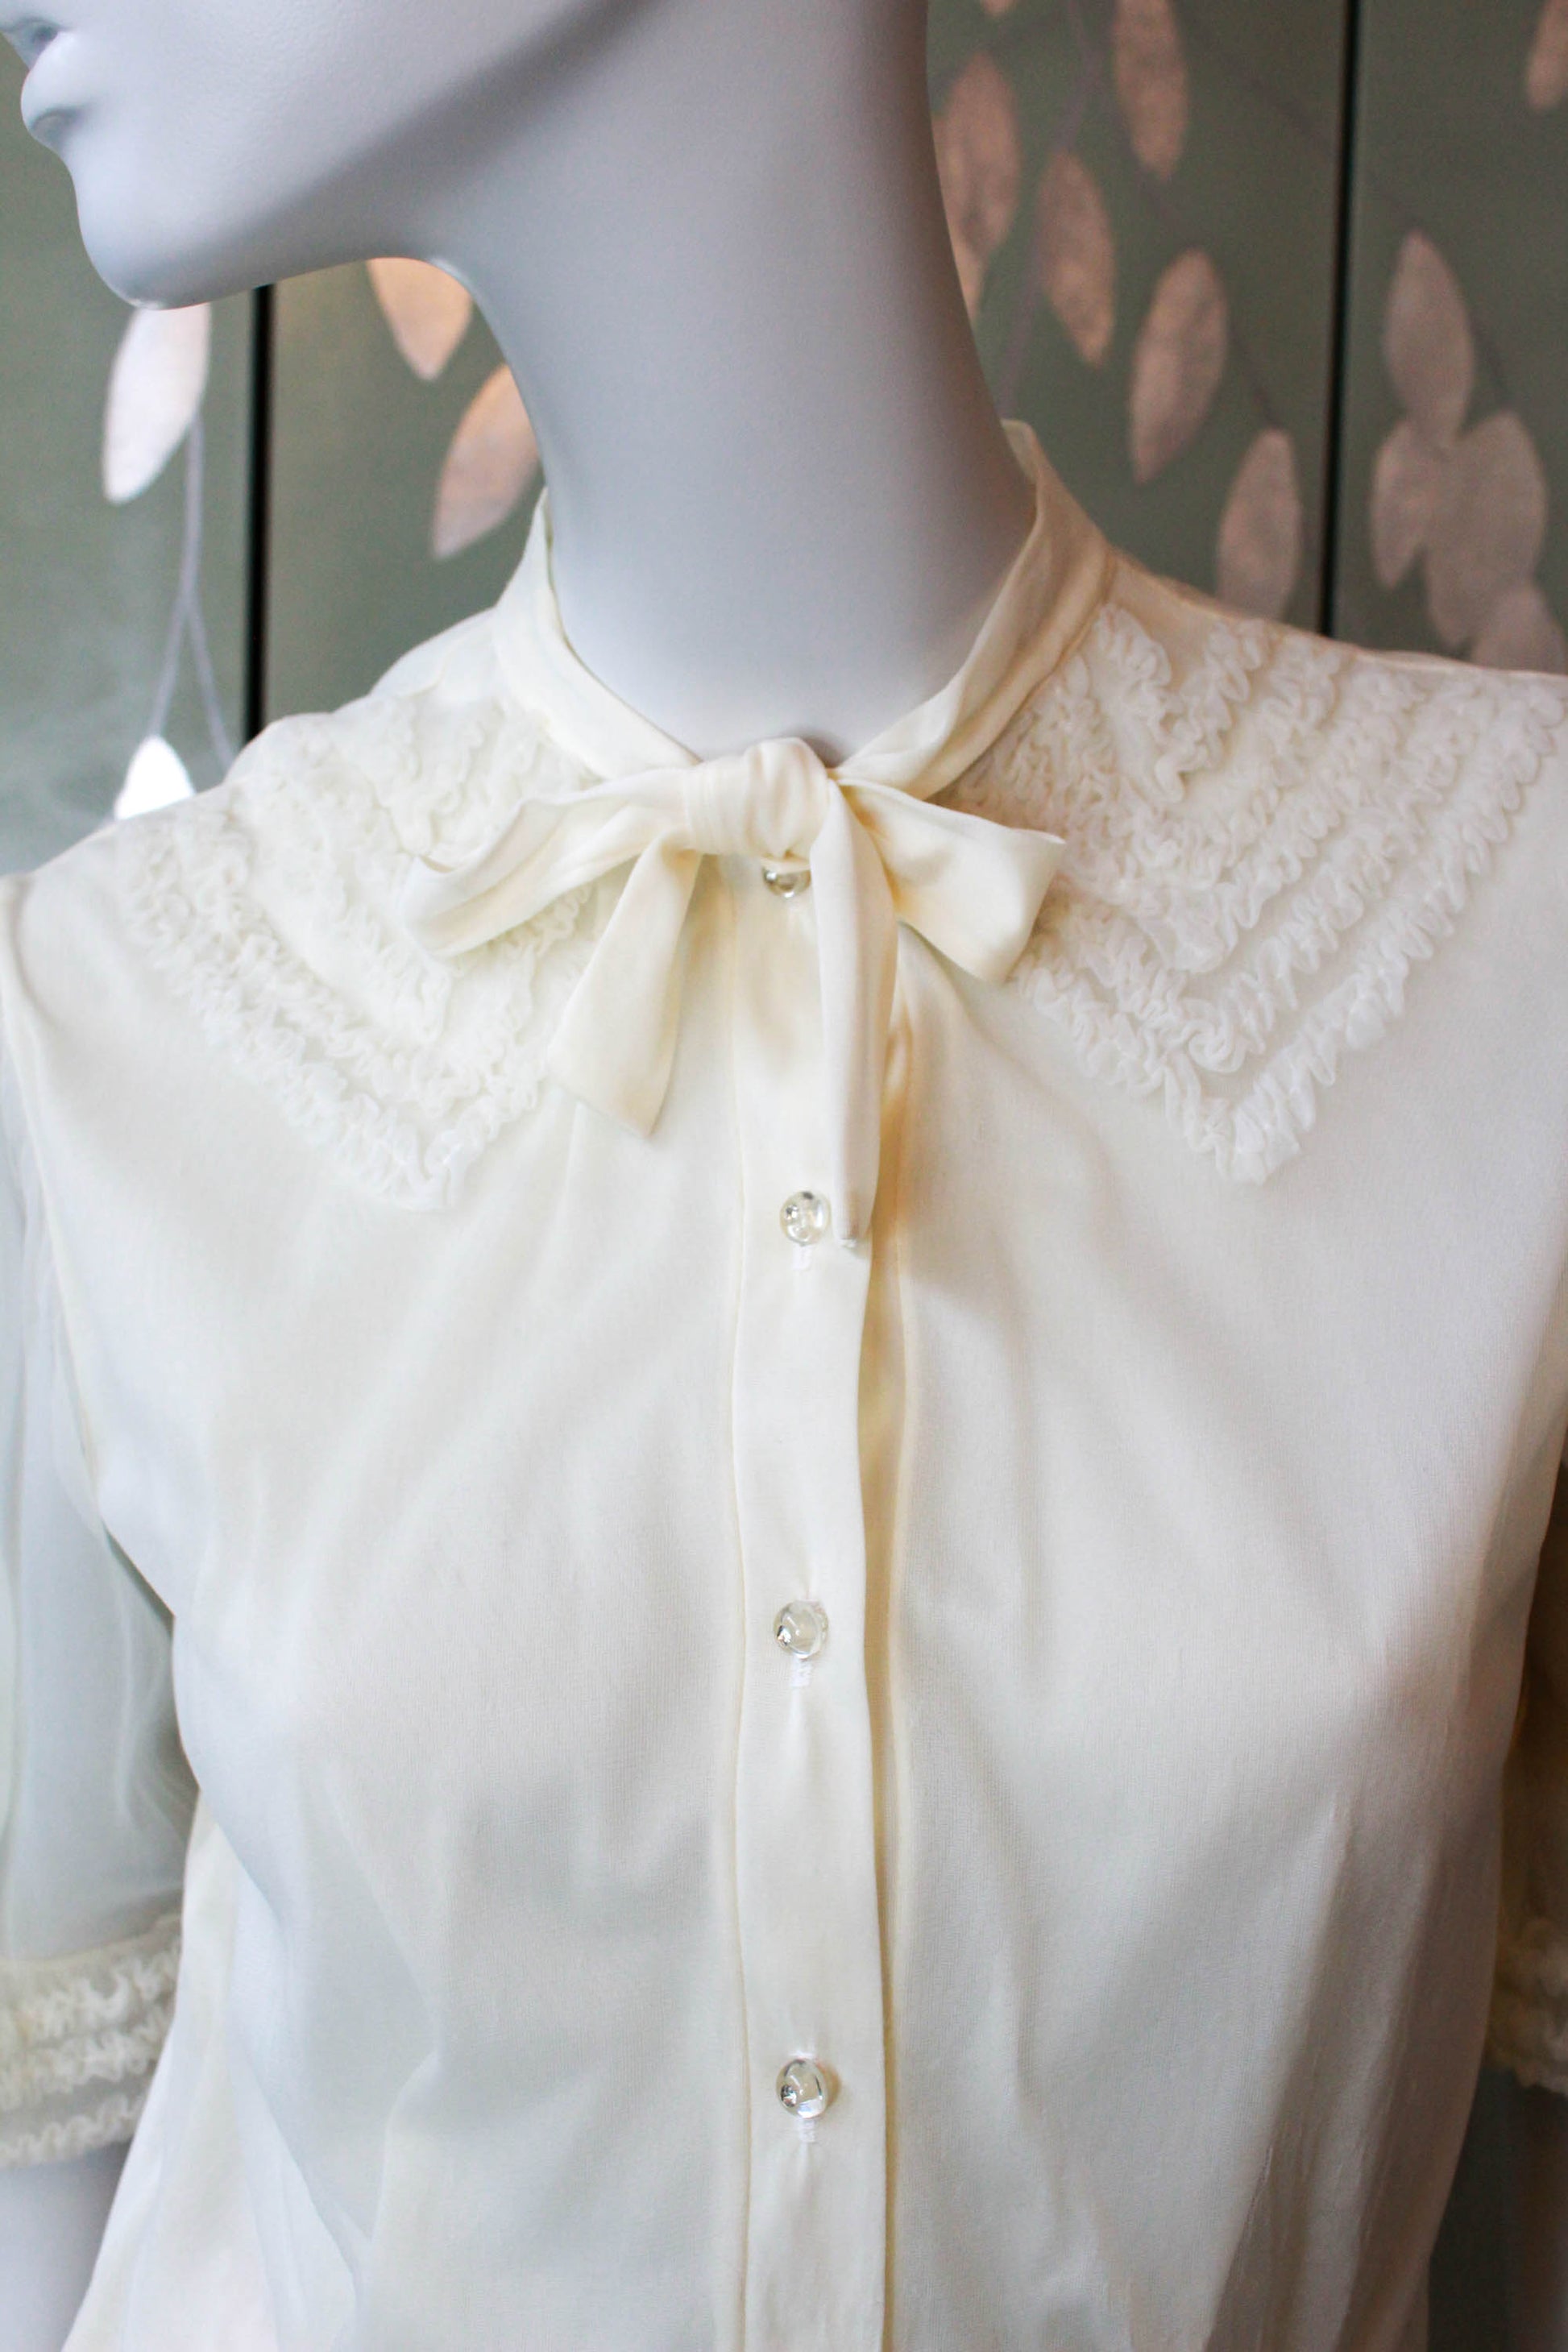 1950s nylon chiffon cream blouse with puff sleeves and faux ruffle appliqued collar design with tie neckline, sheer puff sleeves and clear rhinestone buttons vintage coquette aesthetic romantic feminine blouse